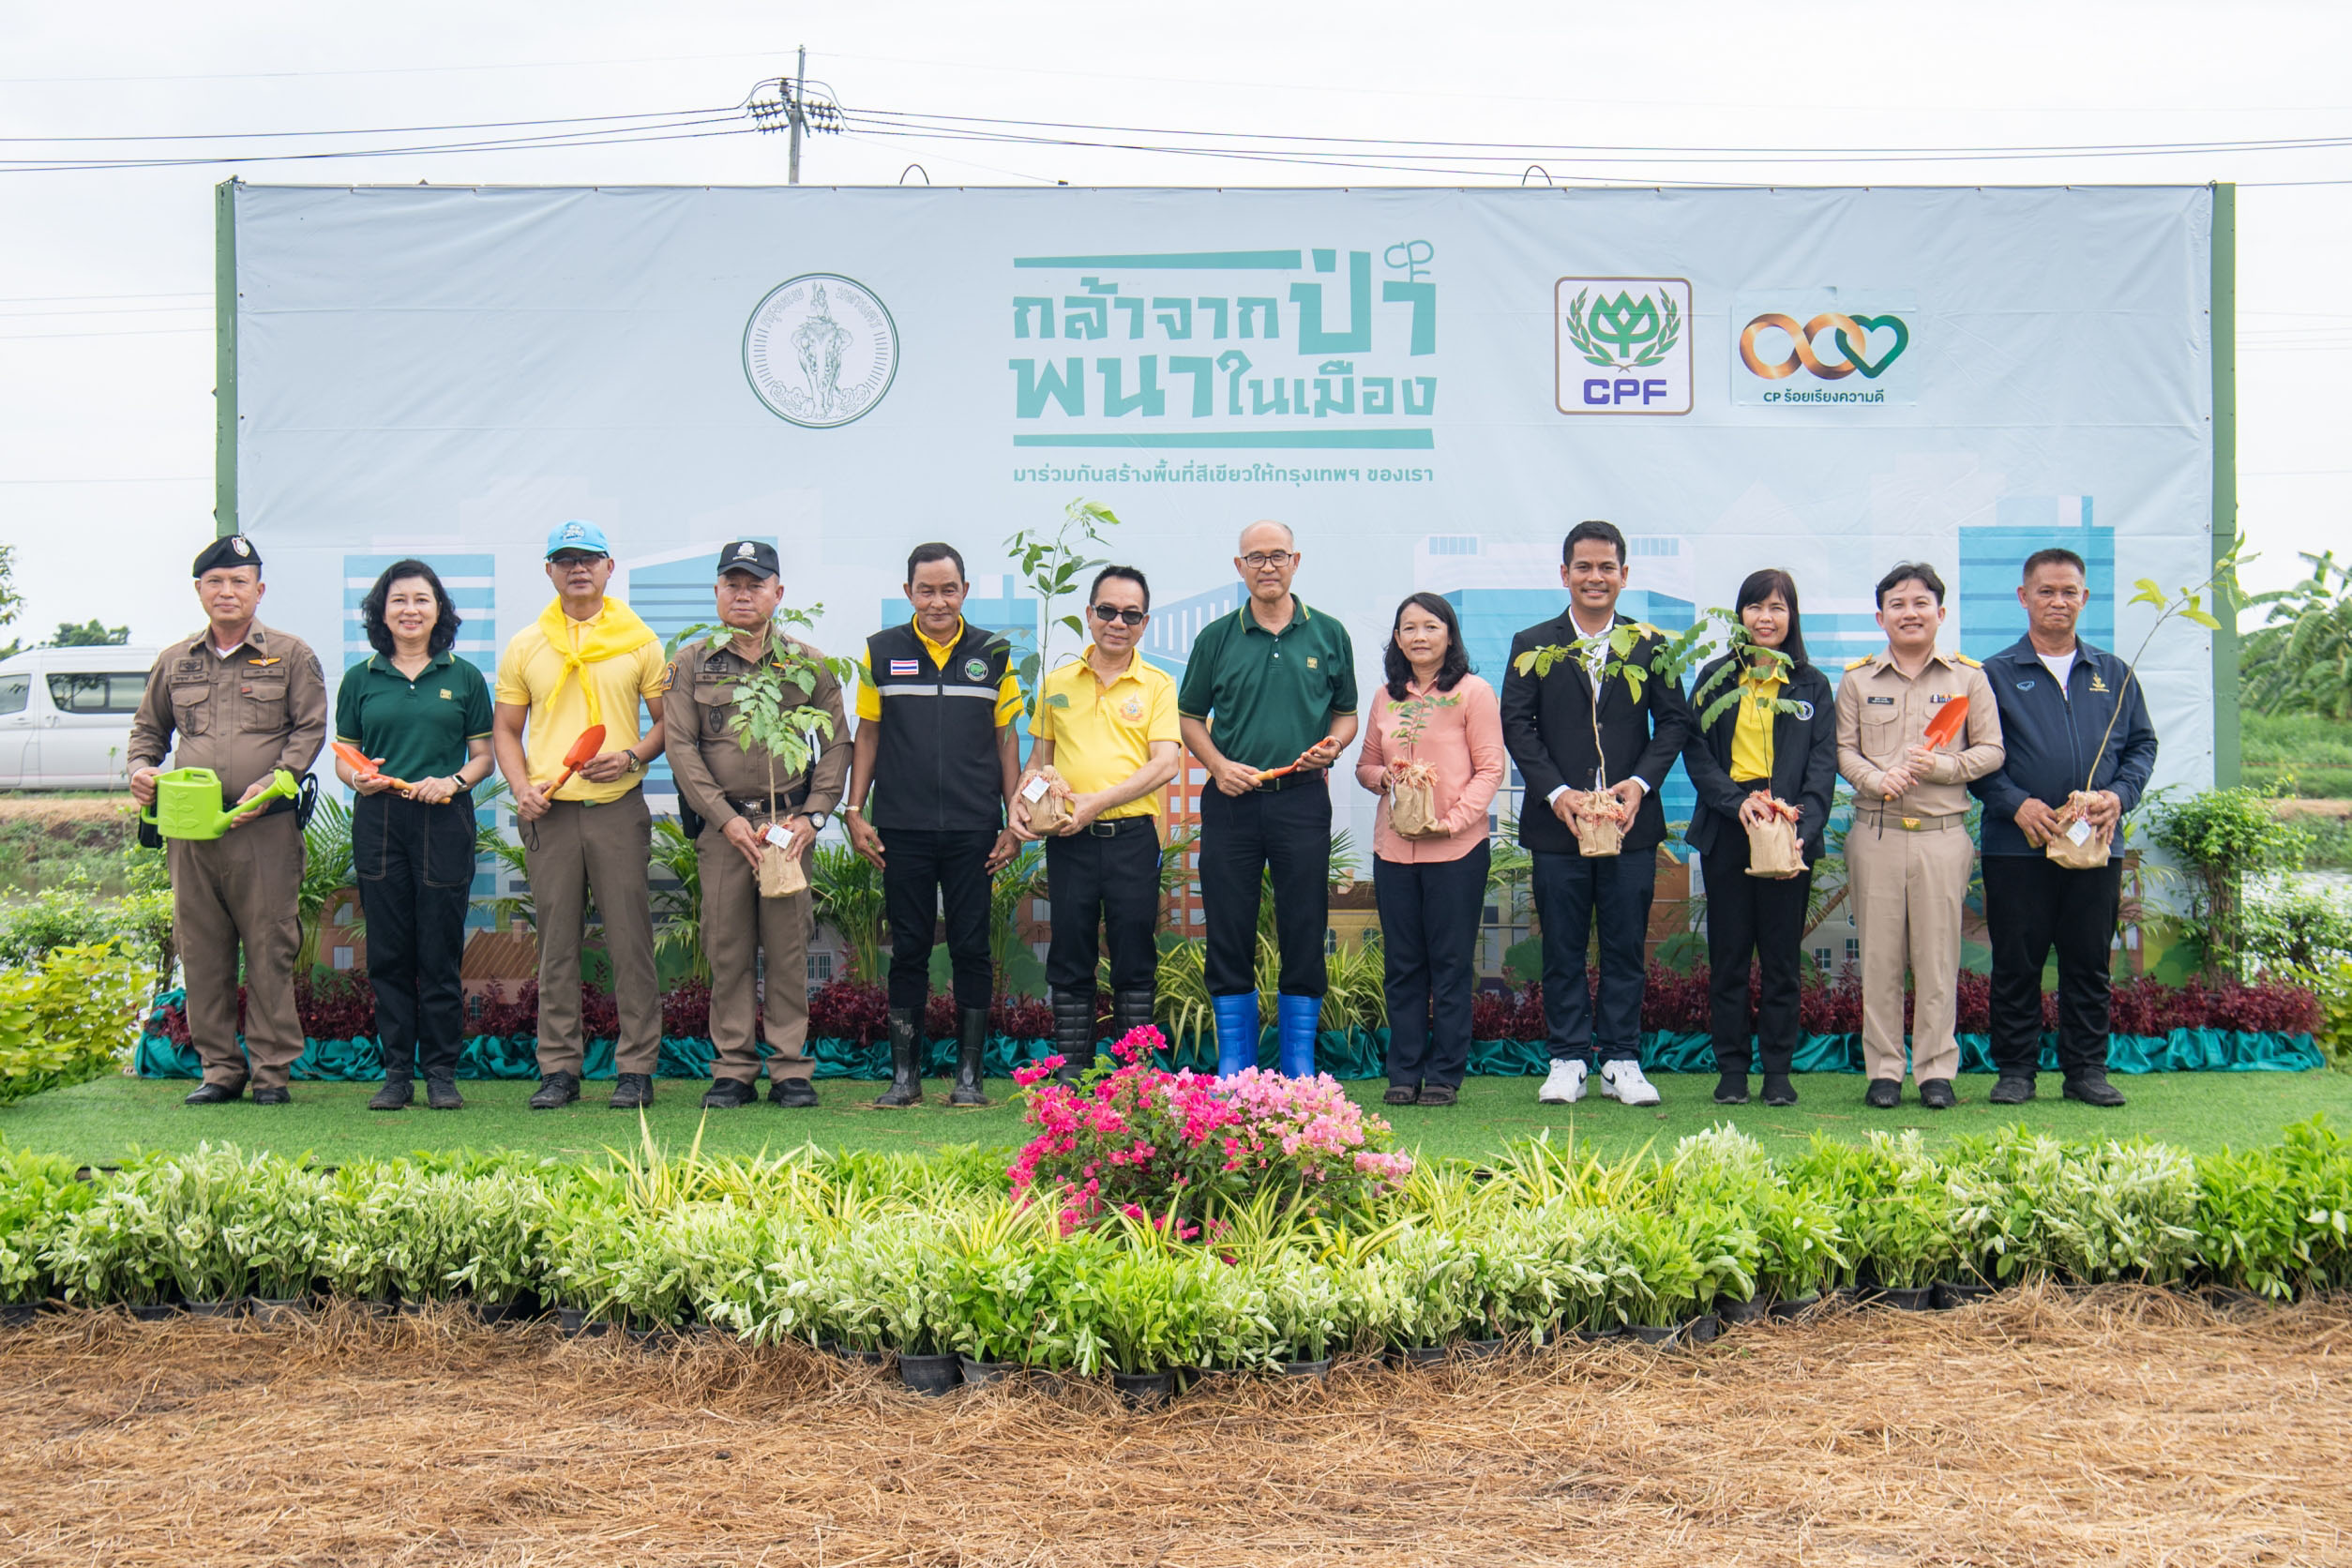 CP Foods Partners with Nong Chok to Expand Green Spaces, Supporting Bangkok's 'Million-Tree' Initiative